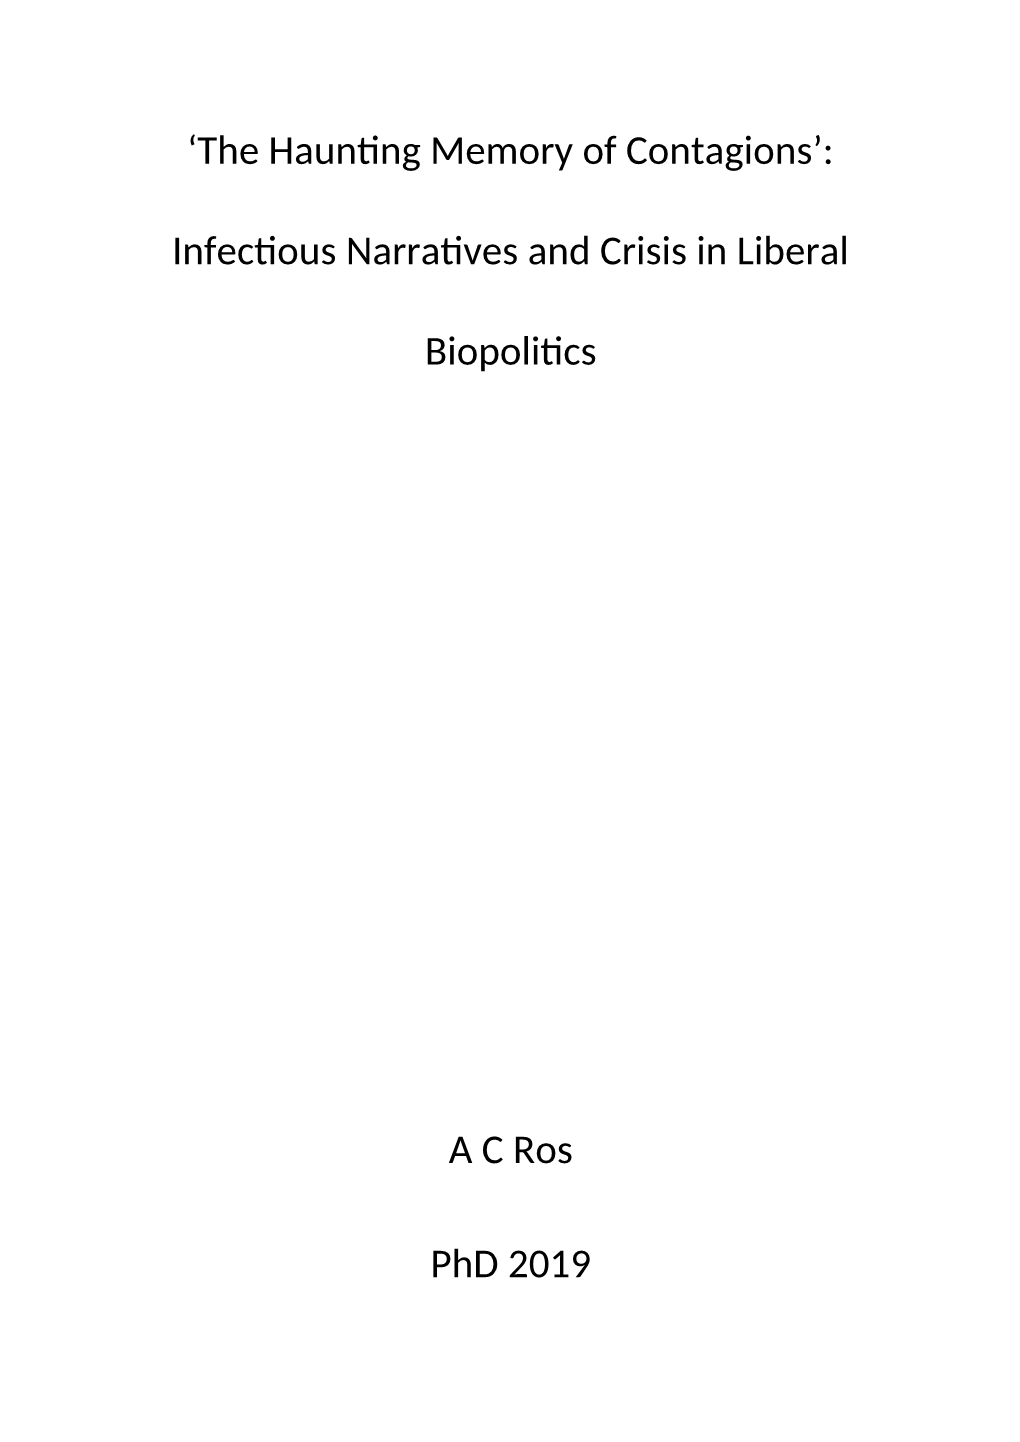 Infectious Narratives and Crisis in Liberal Biopolitics AC Ros Phd 2019